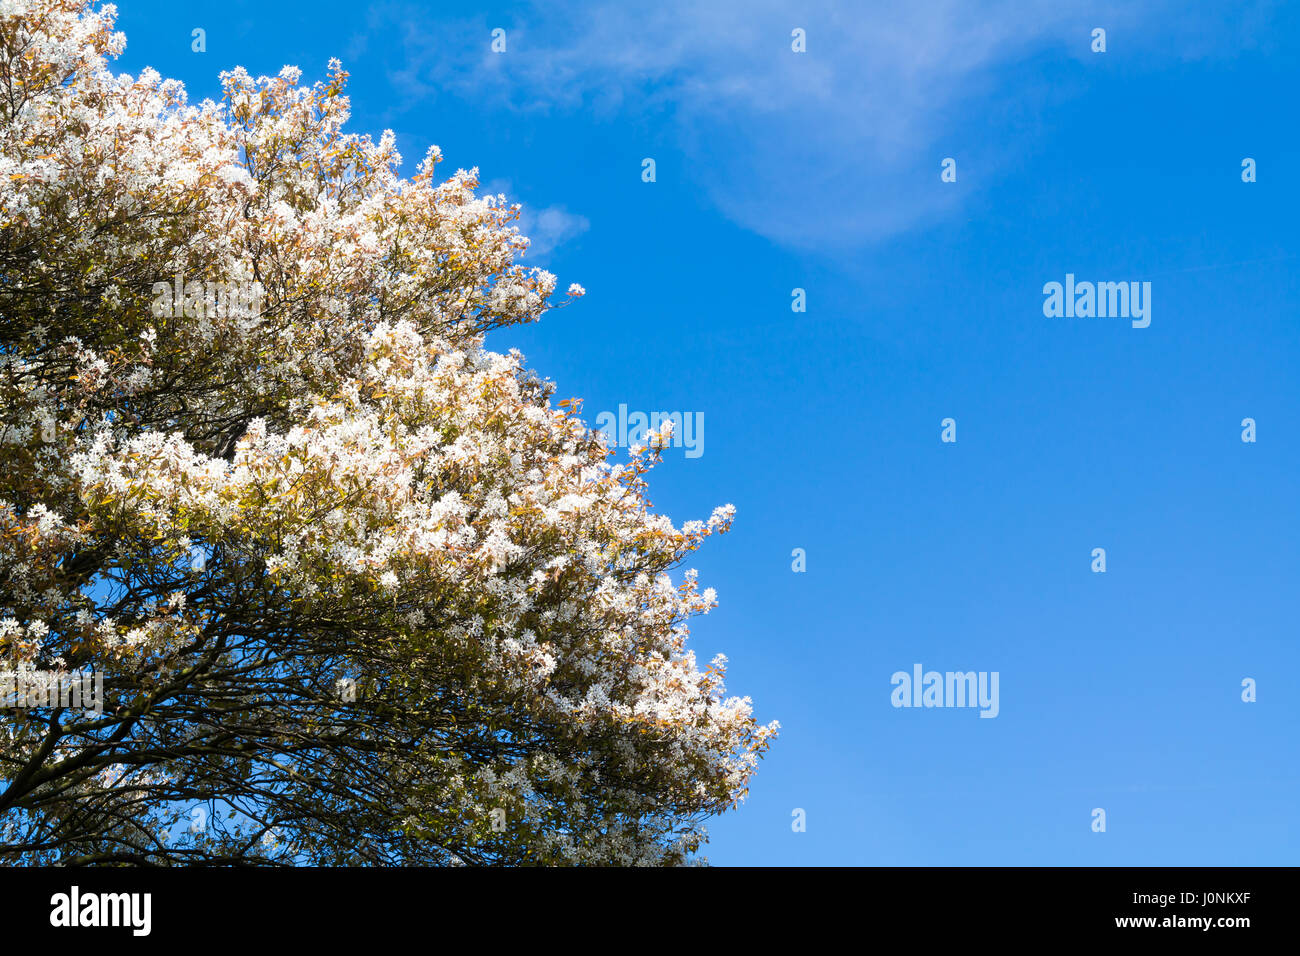 Top of blooming serviceberry or Amelanchier lamarkii tree with white flowers and blue sky in spring, Netherlands Stock Photo